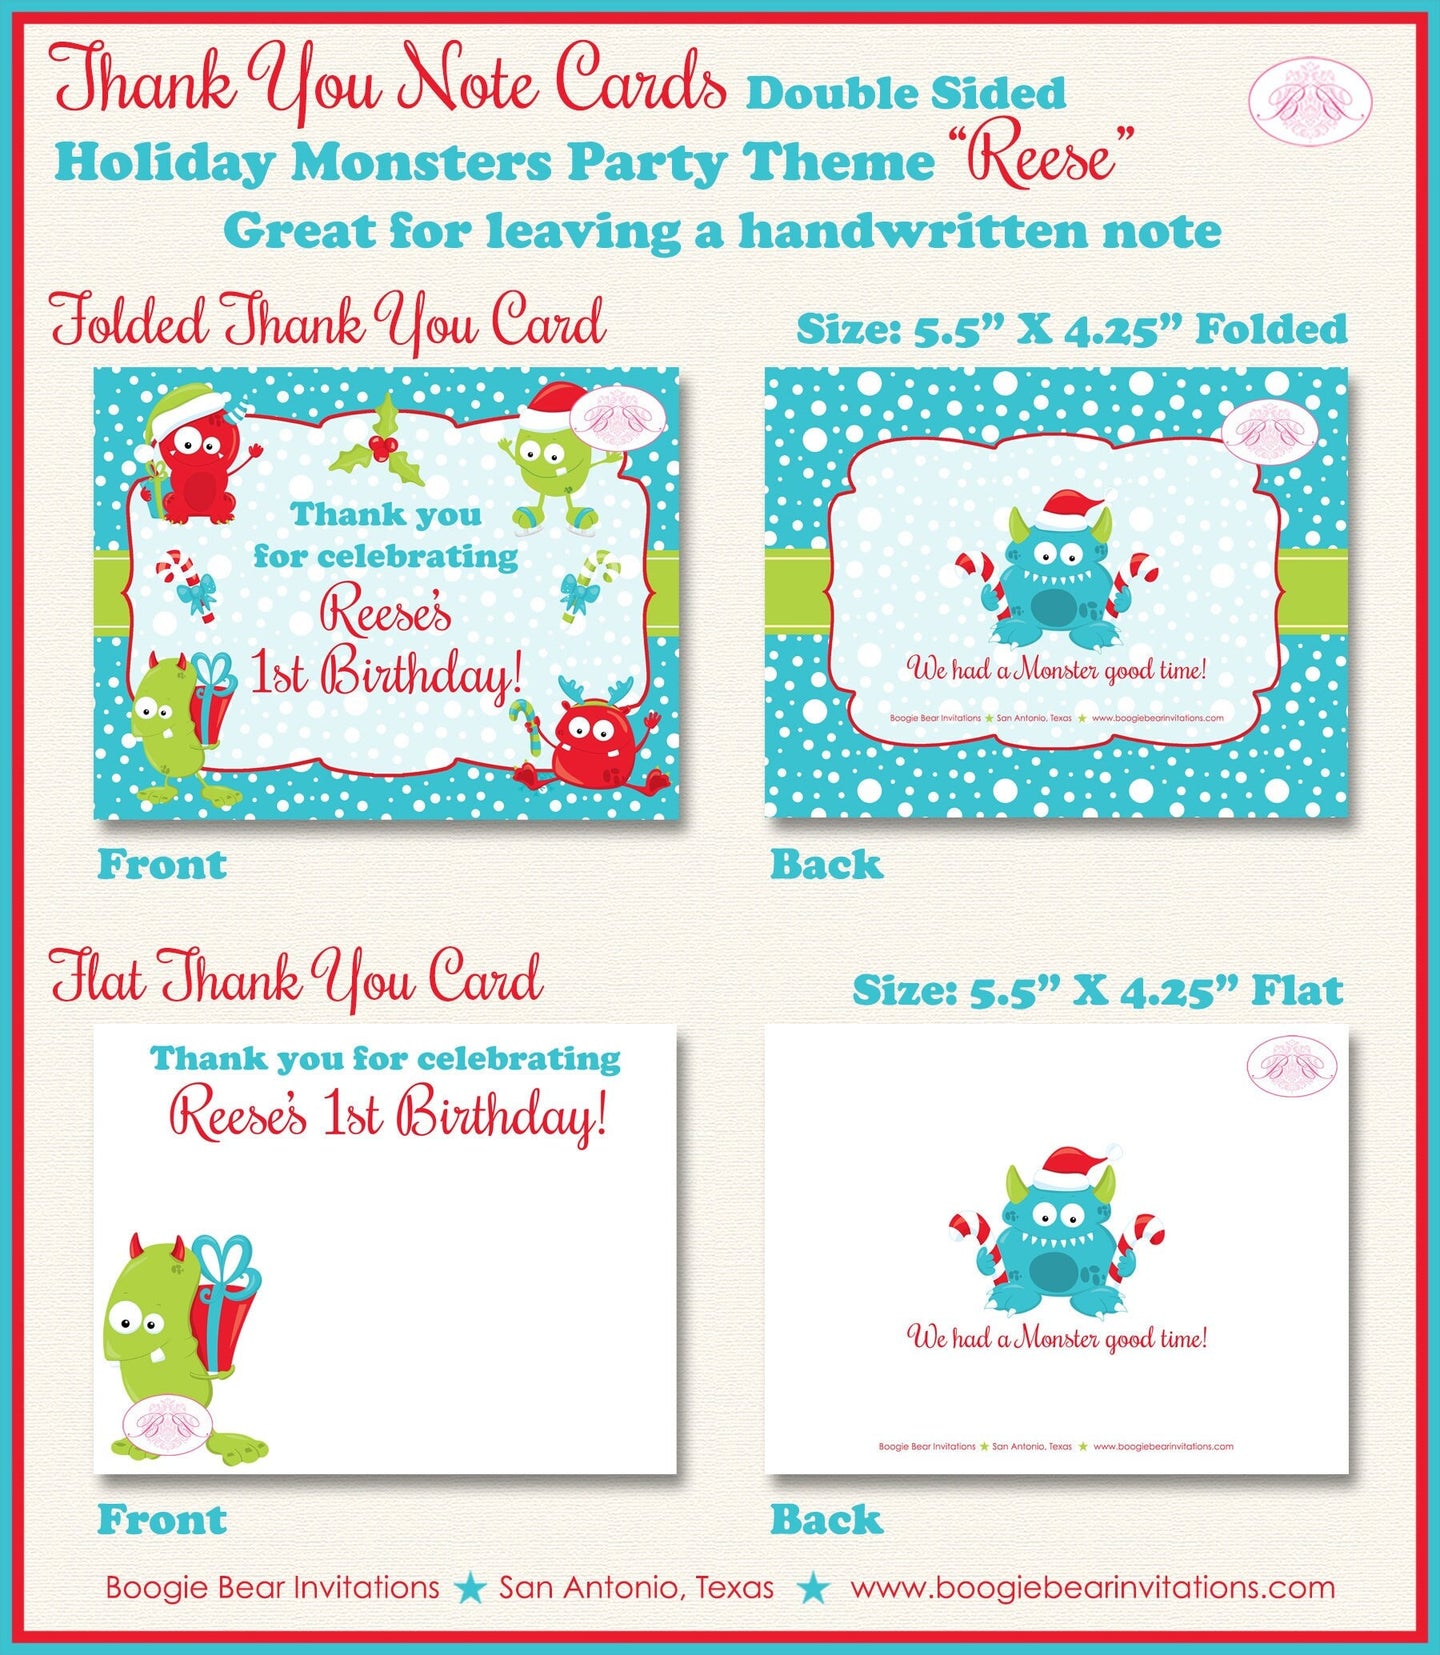 Christmas Monster Party Thank You Cards Birthday Winter Holiday Boy Girl Santa Hat Snowflake Boogie Bear Invitations Reese Theme Printed